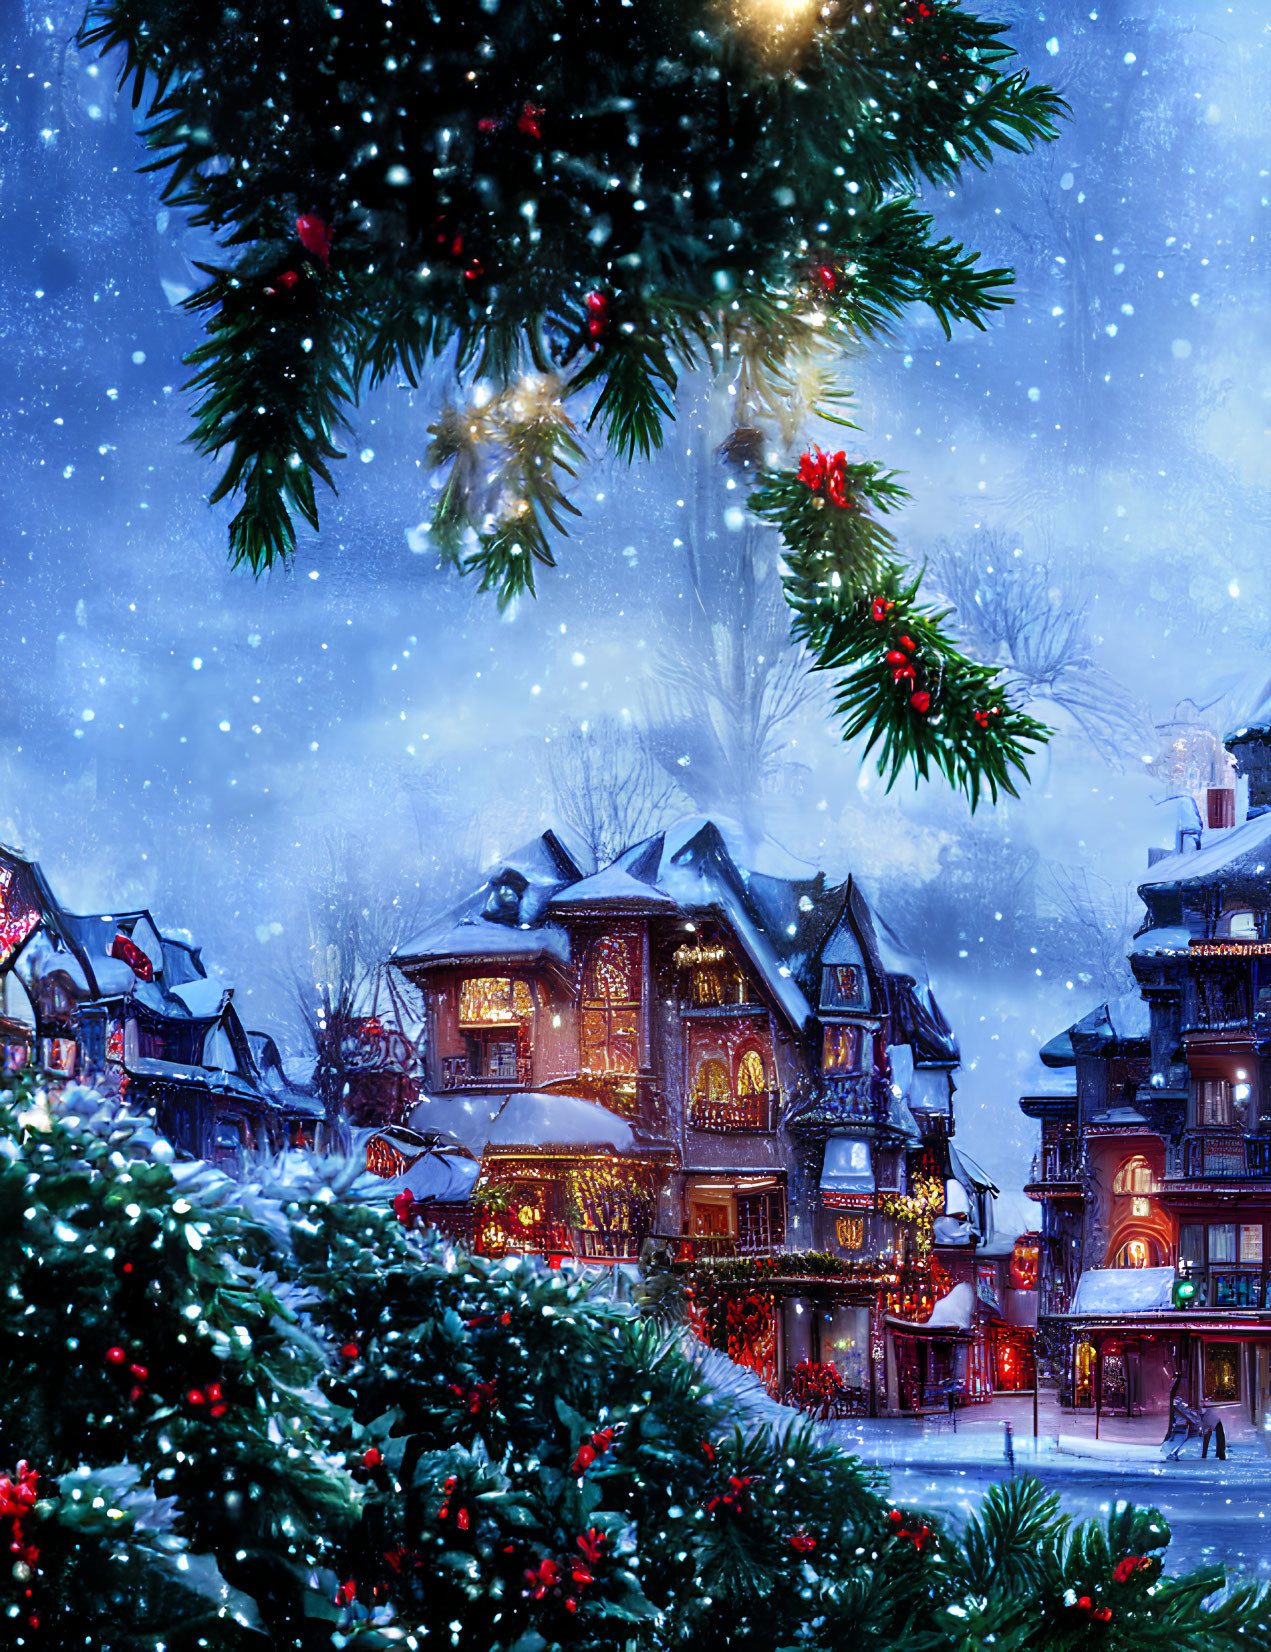 Snow-covered houses with Christmas lights and decorated tree in winter scene